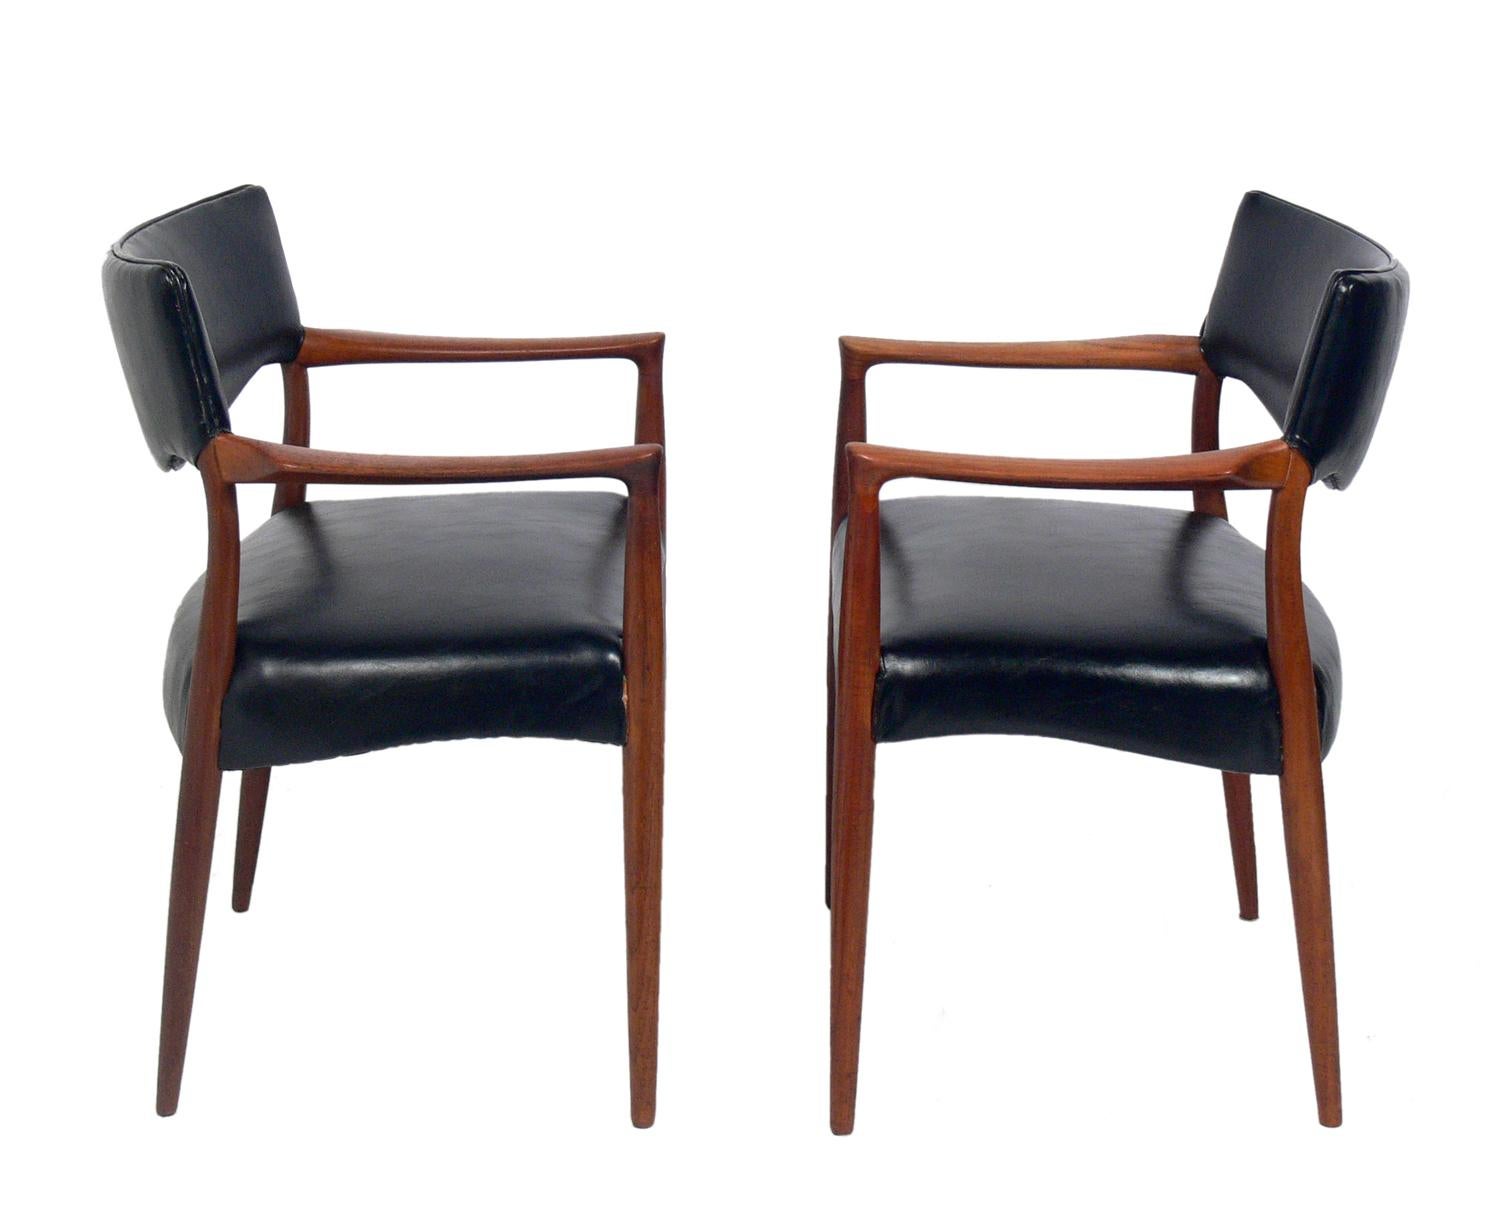 Pair of Danish modern chairs in the manner of Hans Wegner, Denmark, circa 1960s. They retain their black vinyl upholstery and have been cleaned and Danish oiled.